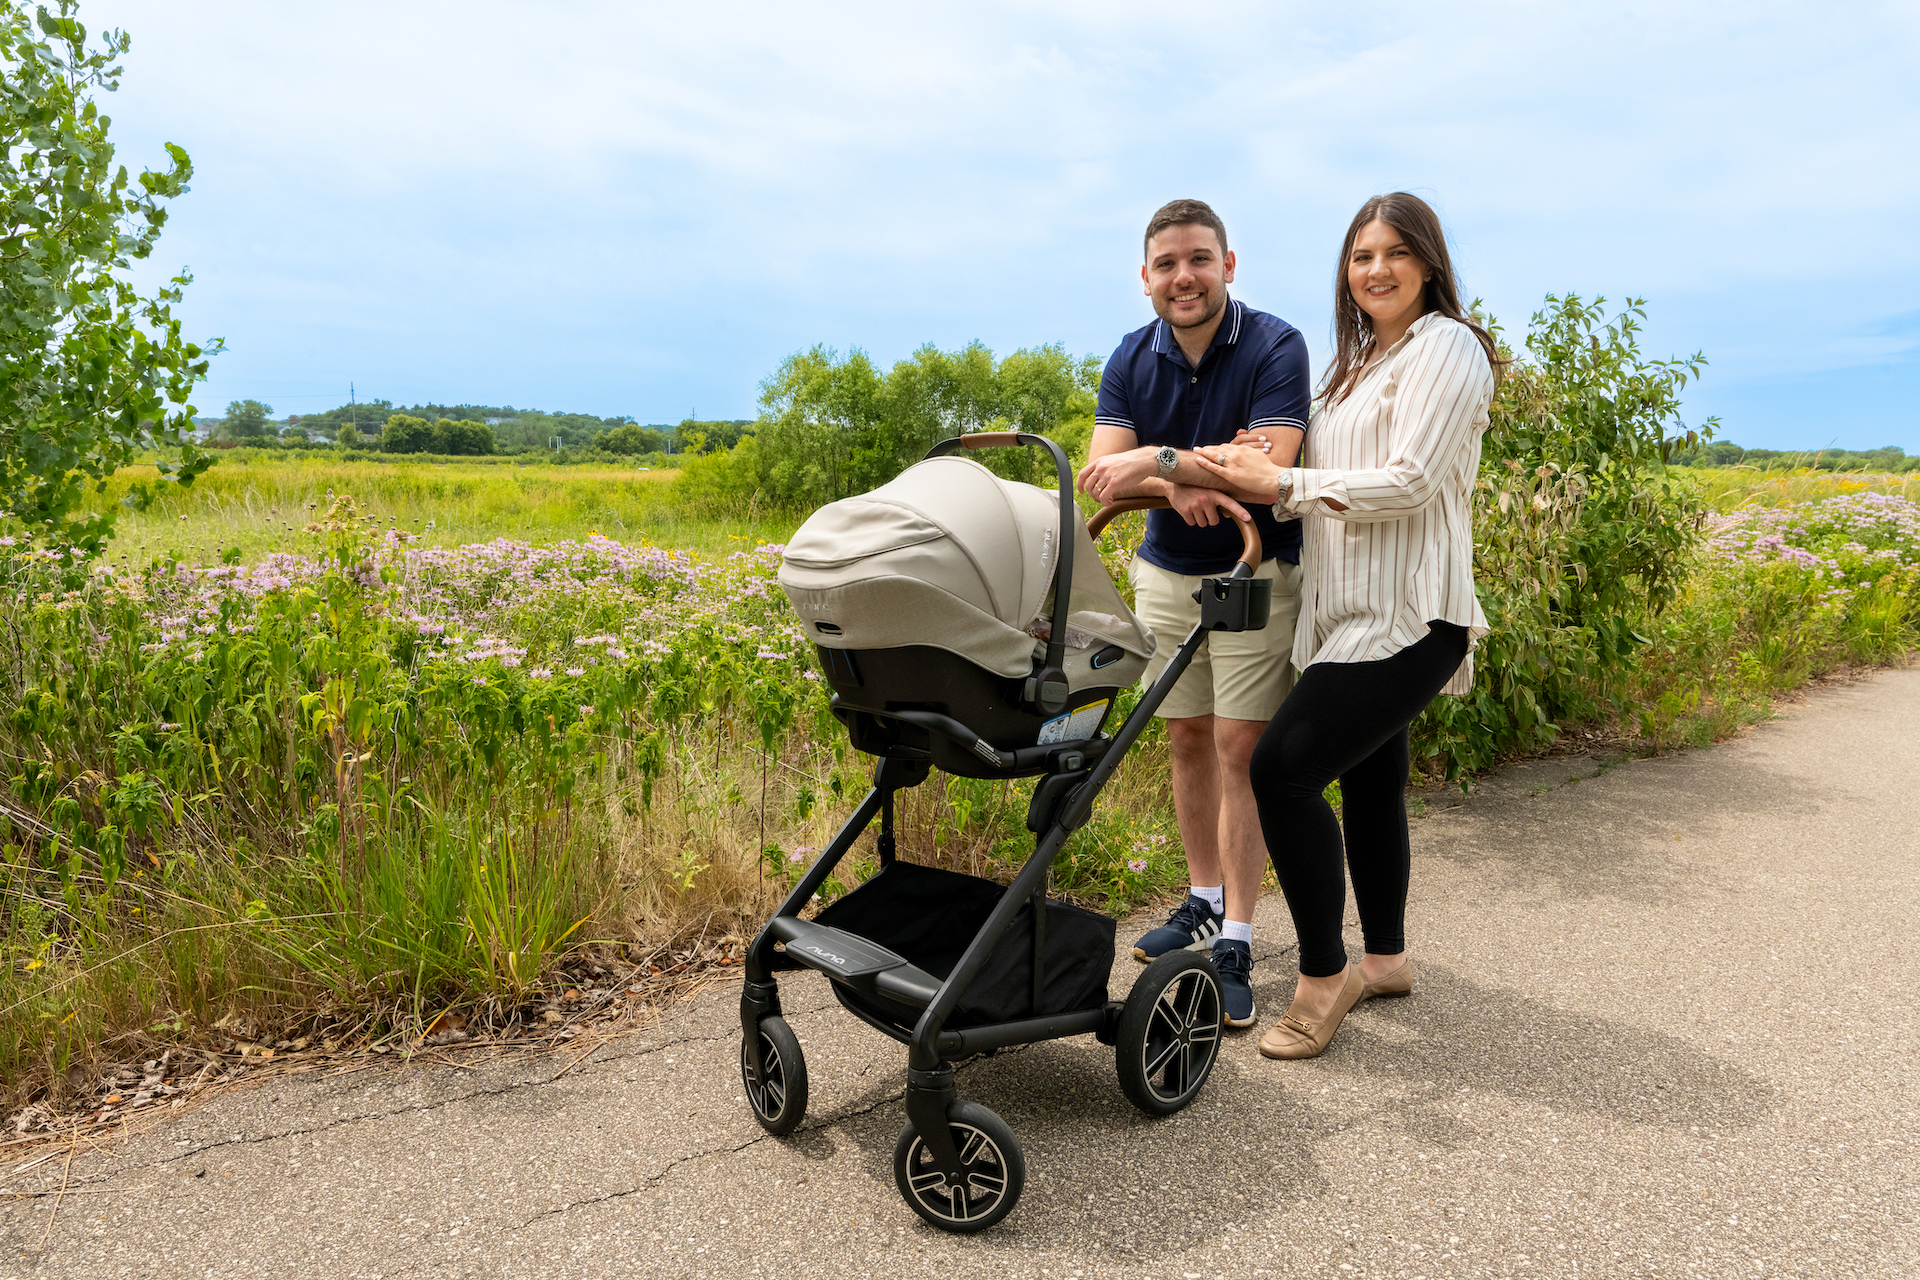 Eastern european husband and wife standing with stroller on path through field of wildflowers